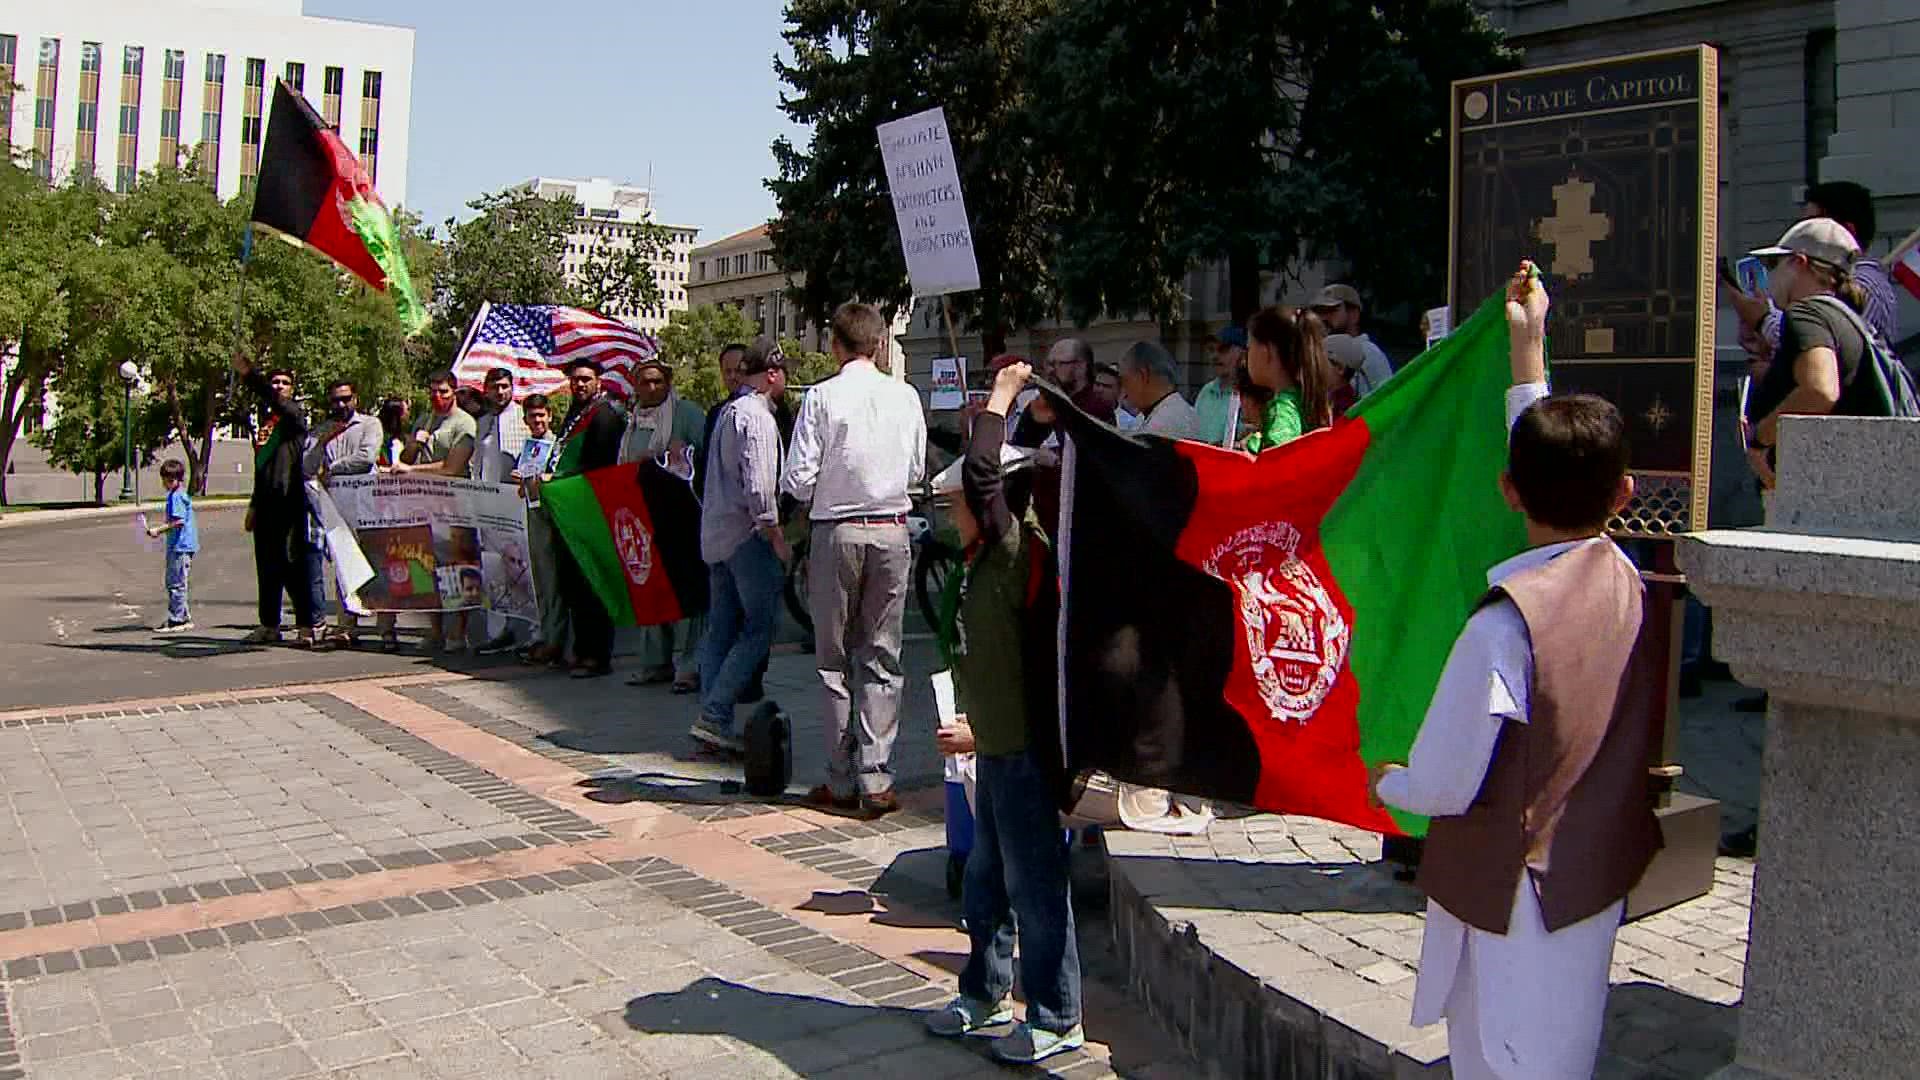 A local group, Operation Rescue Afghan Interpreters, held a rally with U.S. vets at the state Capitol in support of interpreters and contractors in Afghanistan.